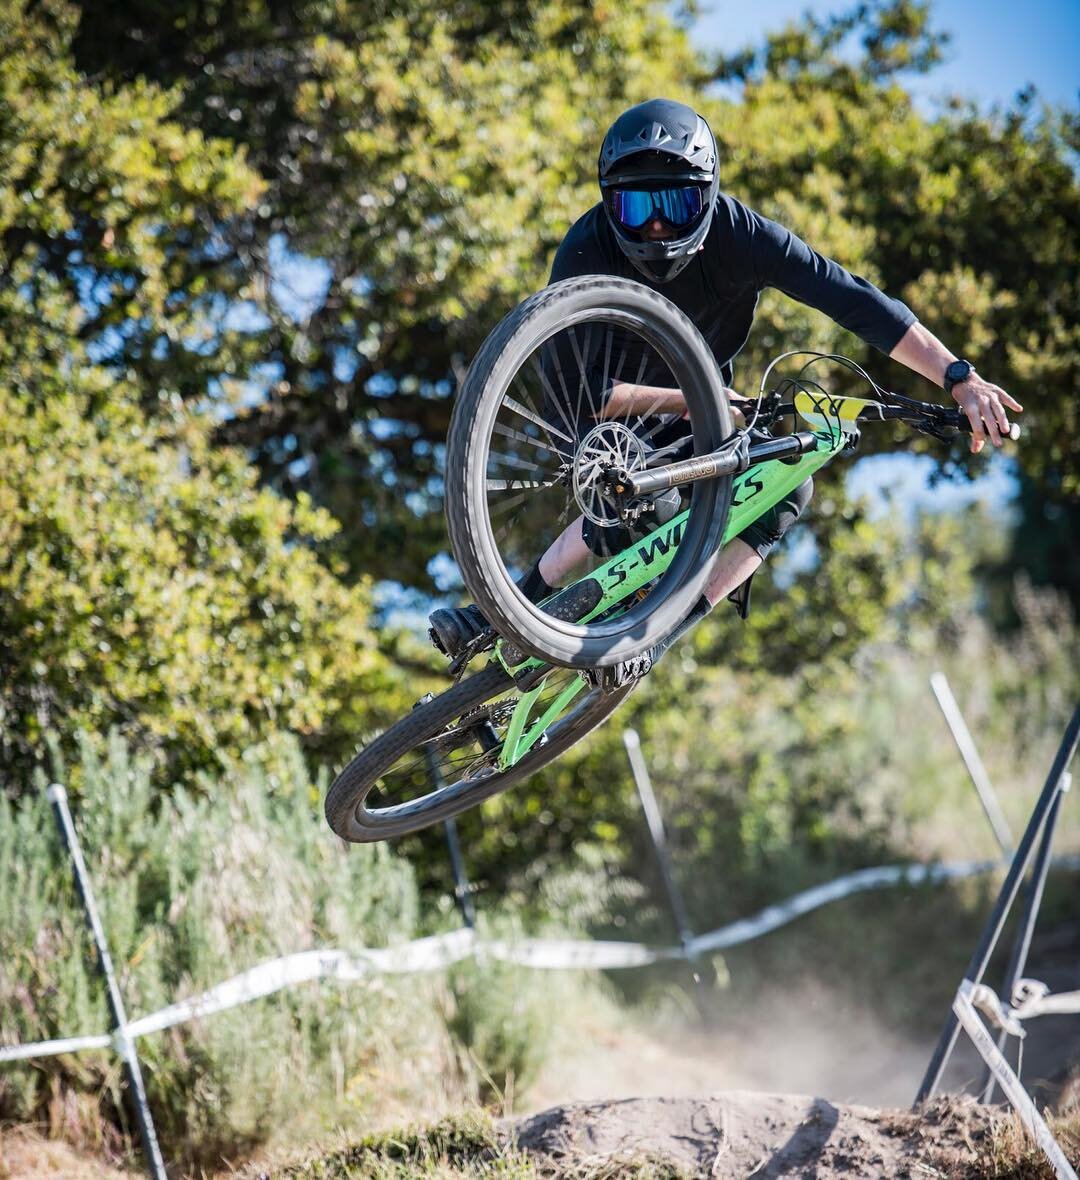 Send it into the weekend with style!
.
.
.
#sendit #mtb #mountainbike #ride #race #bike #bikelife #style #air #jump #athlete #dirt #hangtime